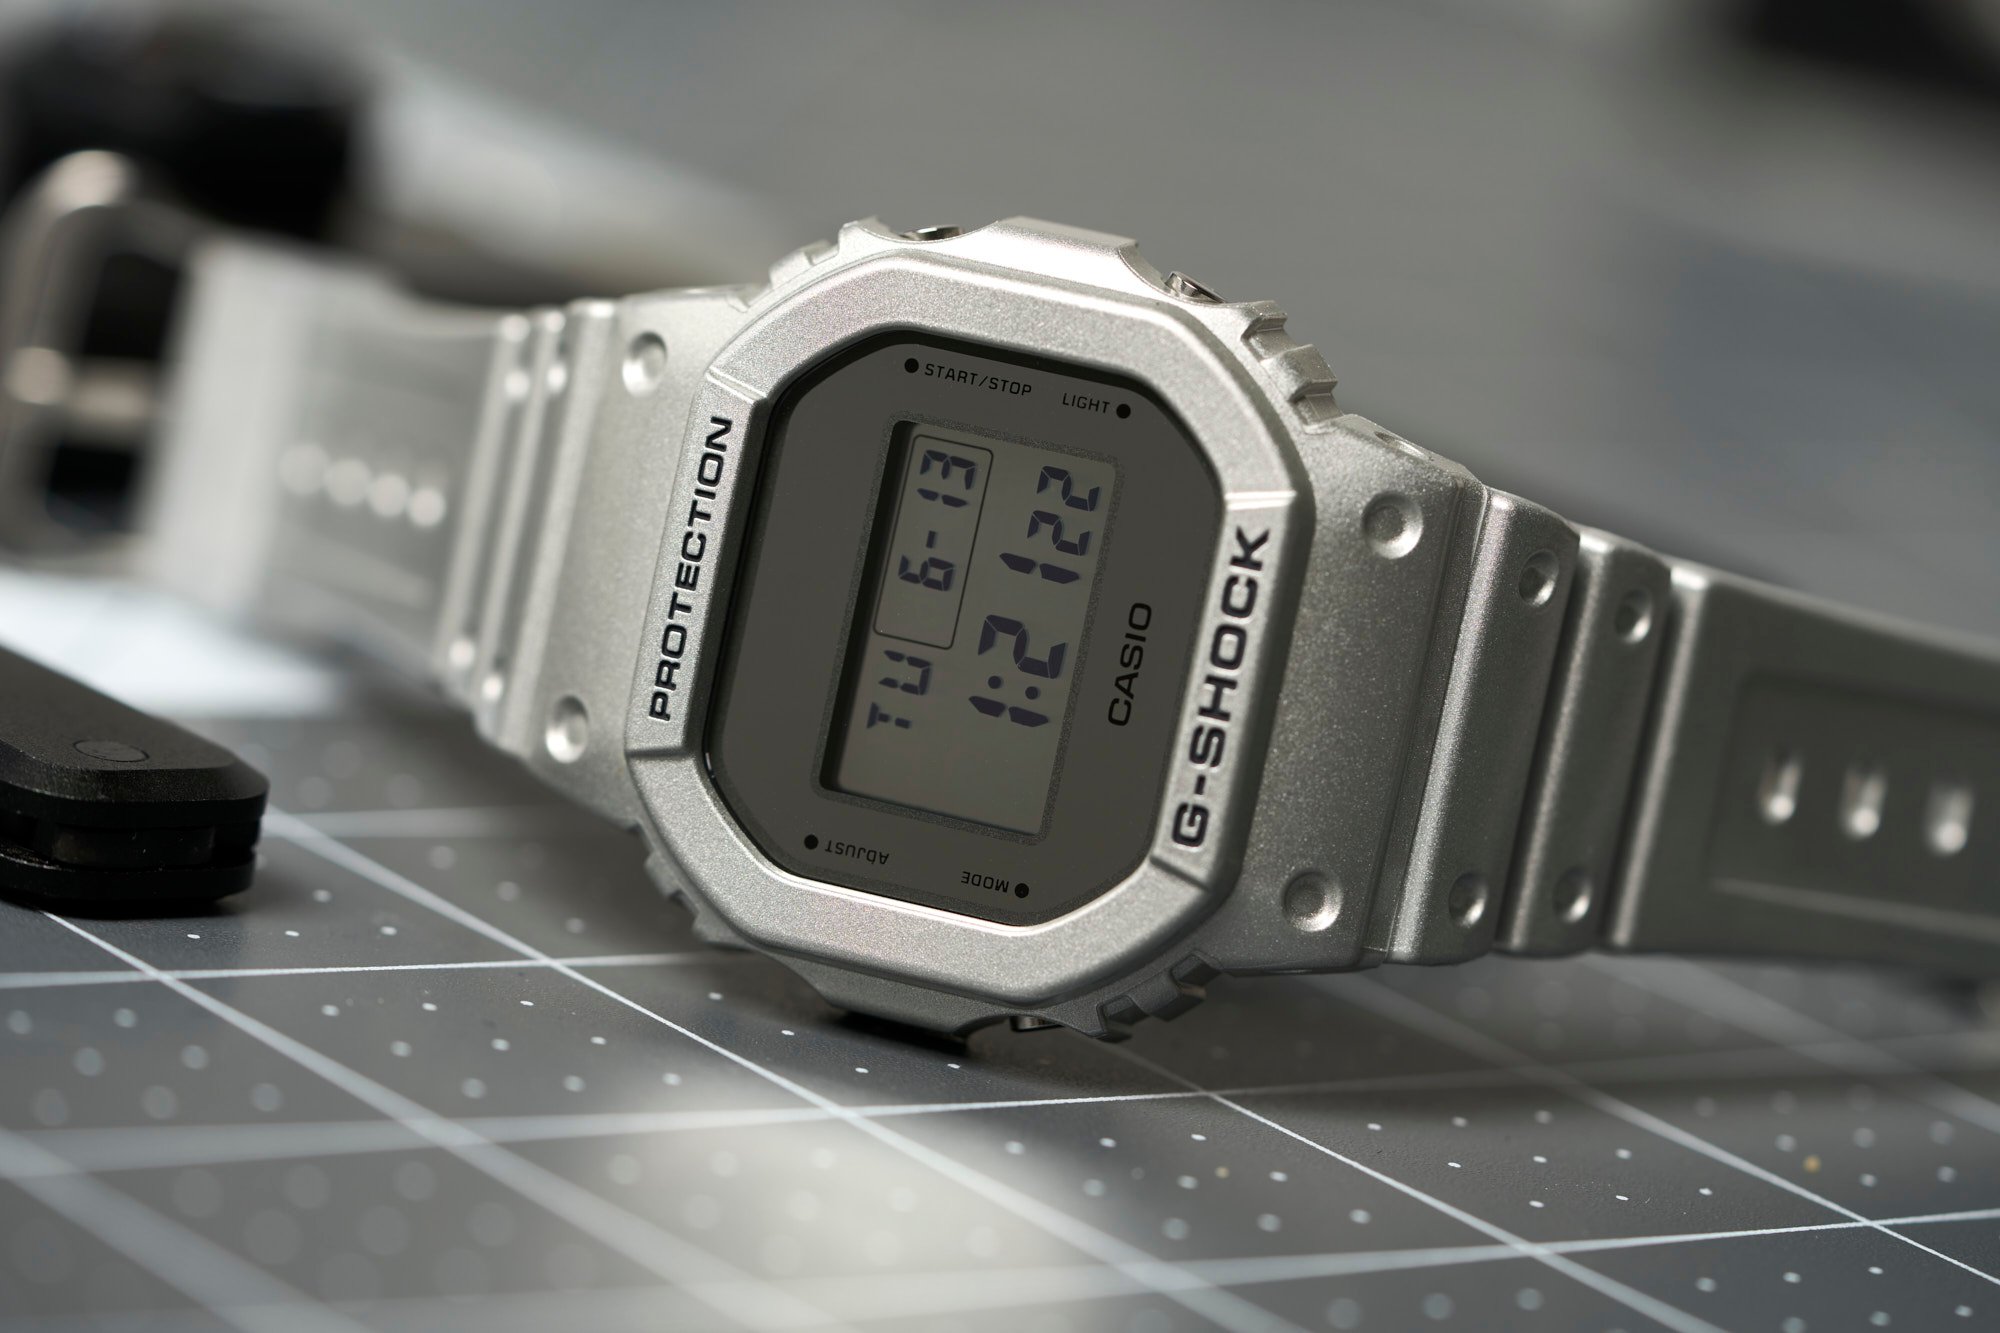 Casio G-Shock Basic Settings for DW-5600 / DW5600E: Time, Date